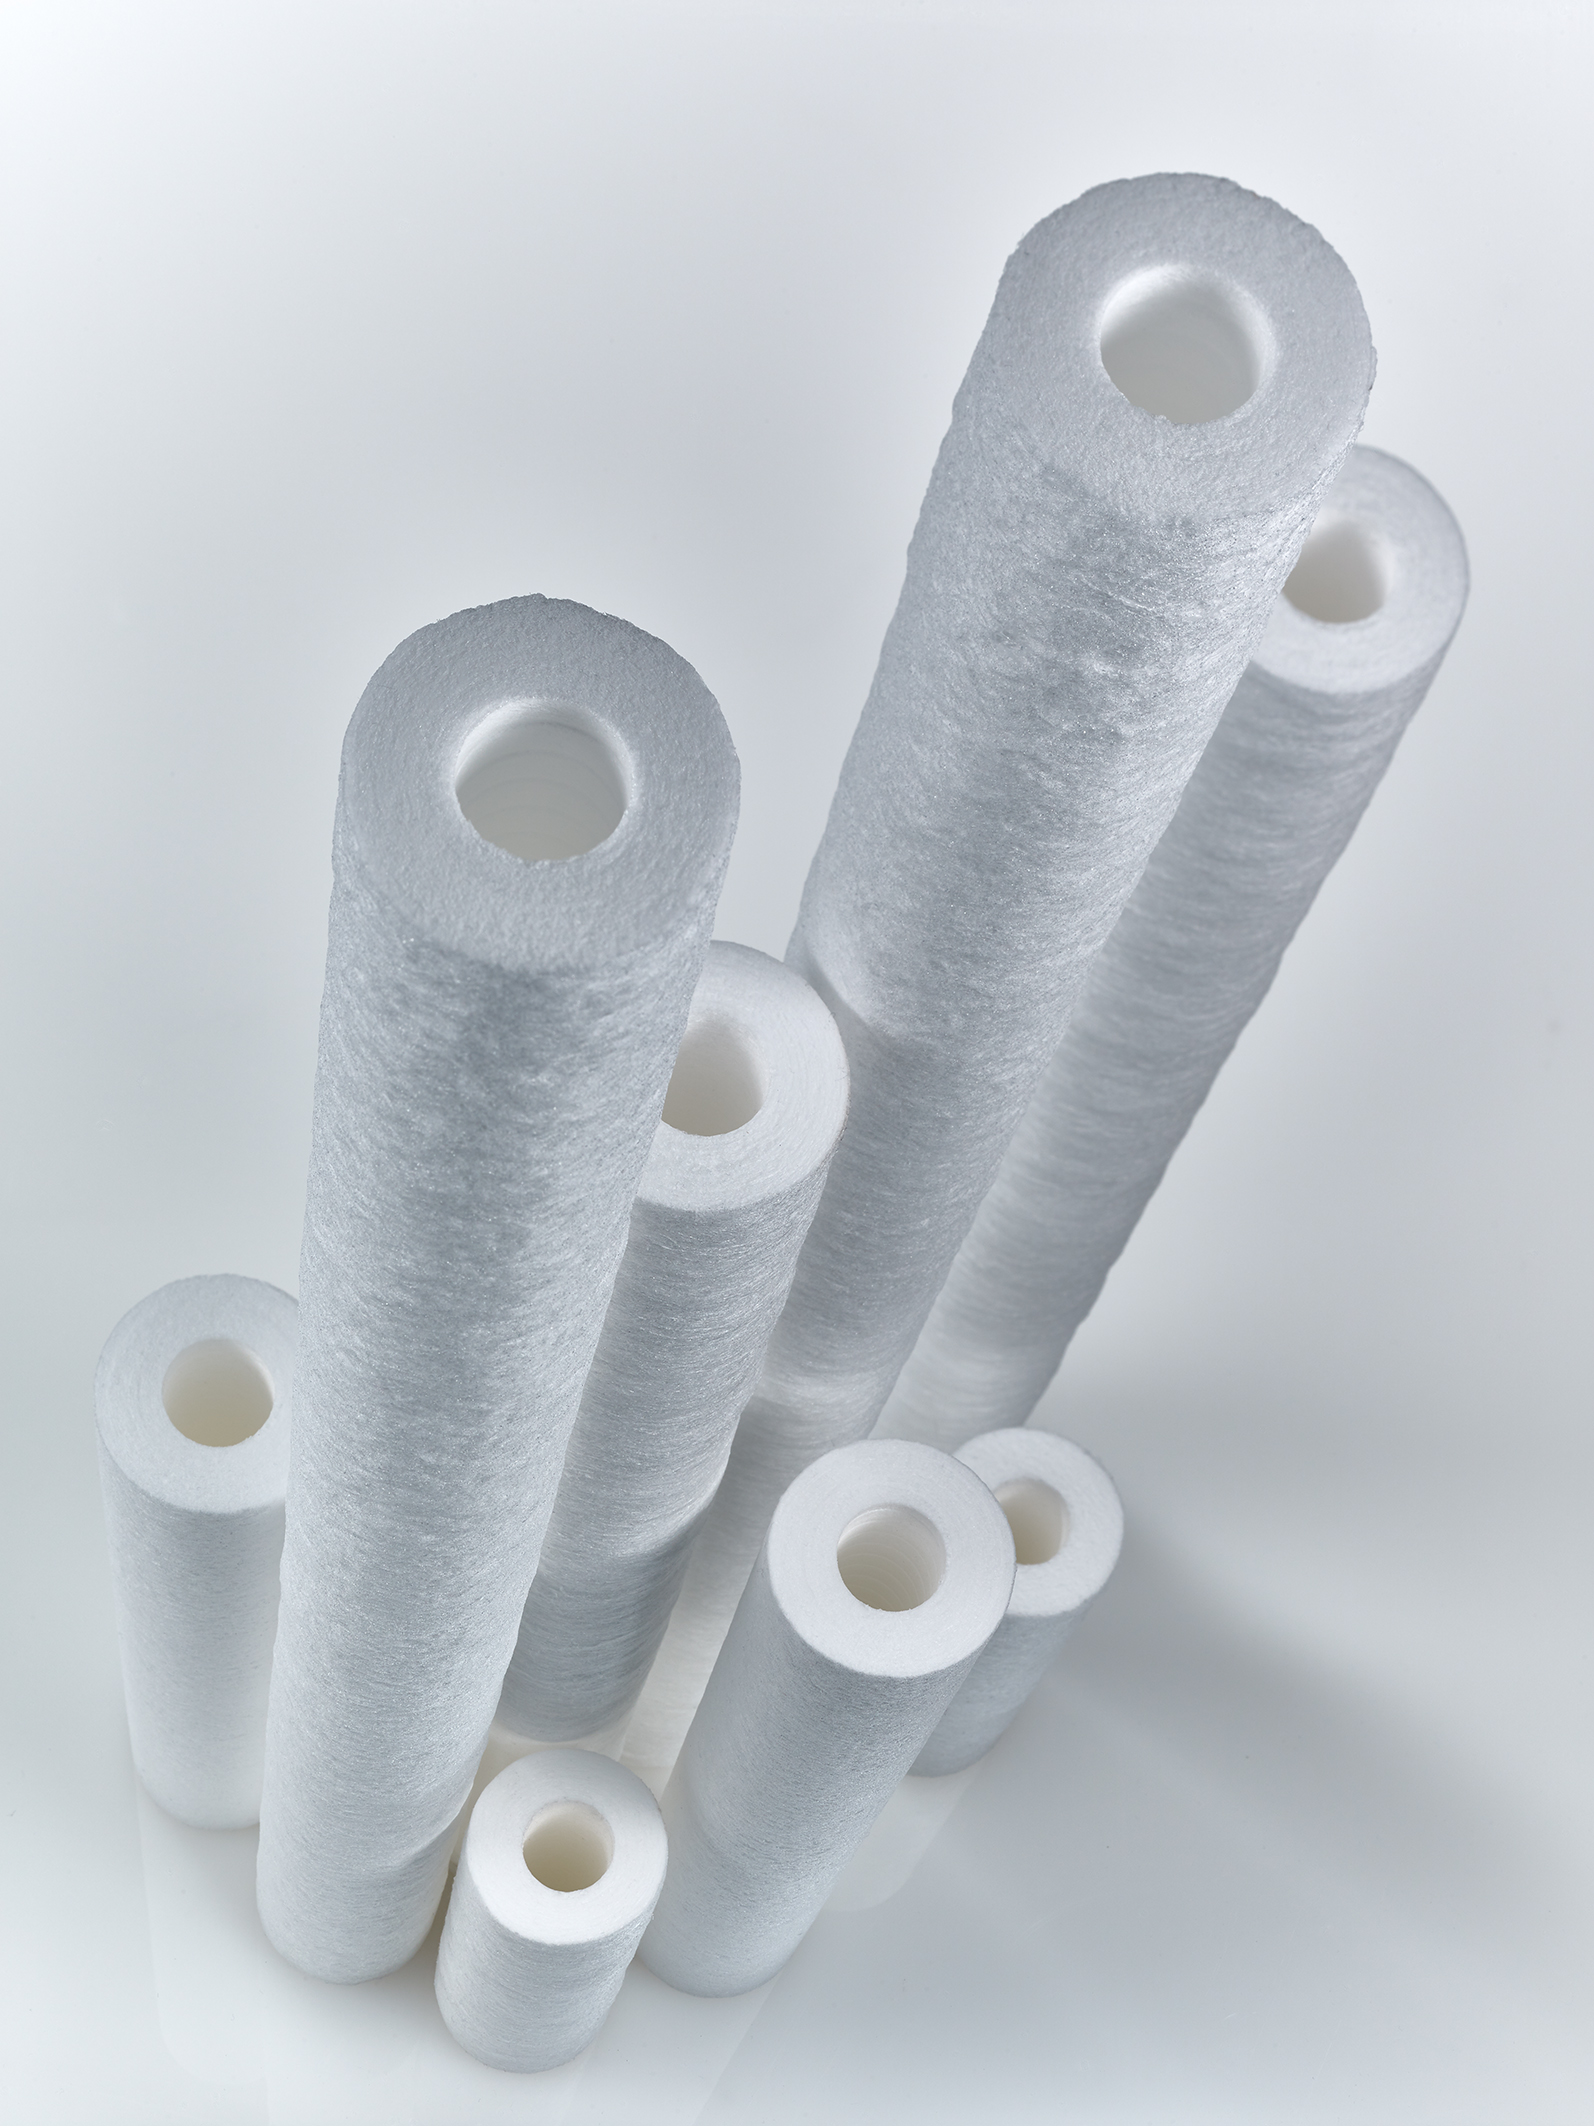 Eaton has responded to the market’s demand for high-temperature and chemical resistant filter cartridges.